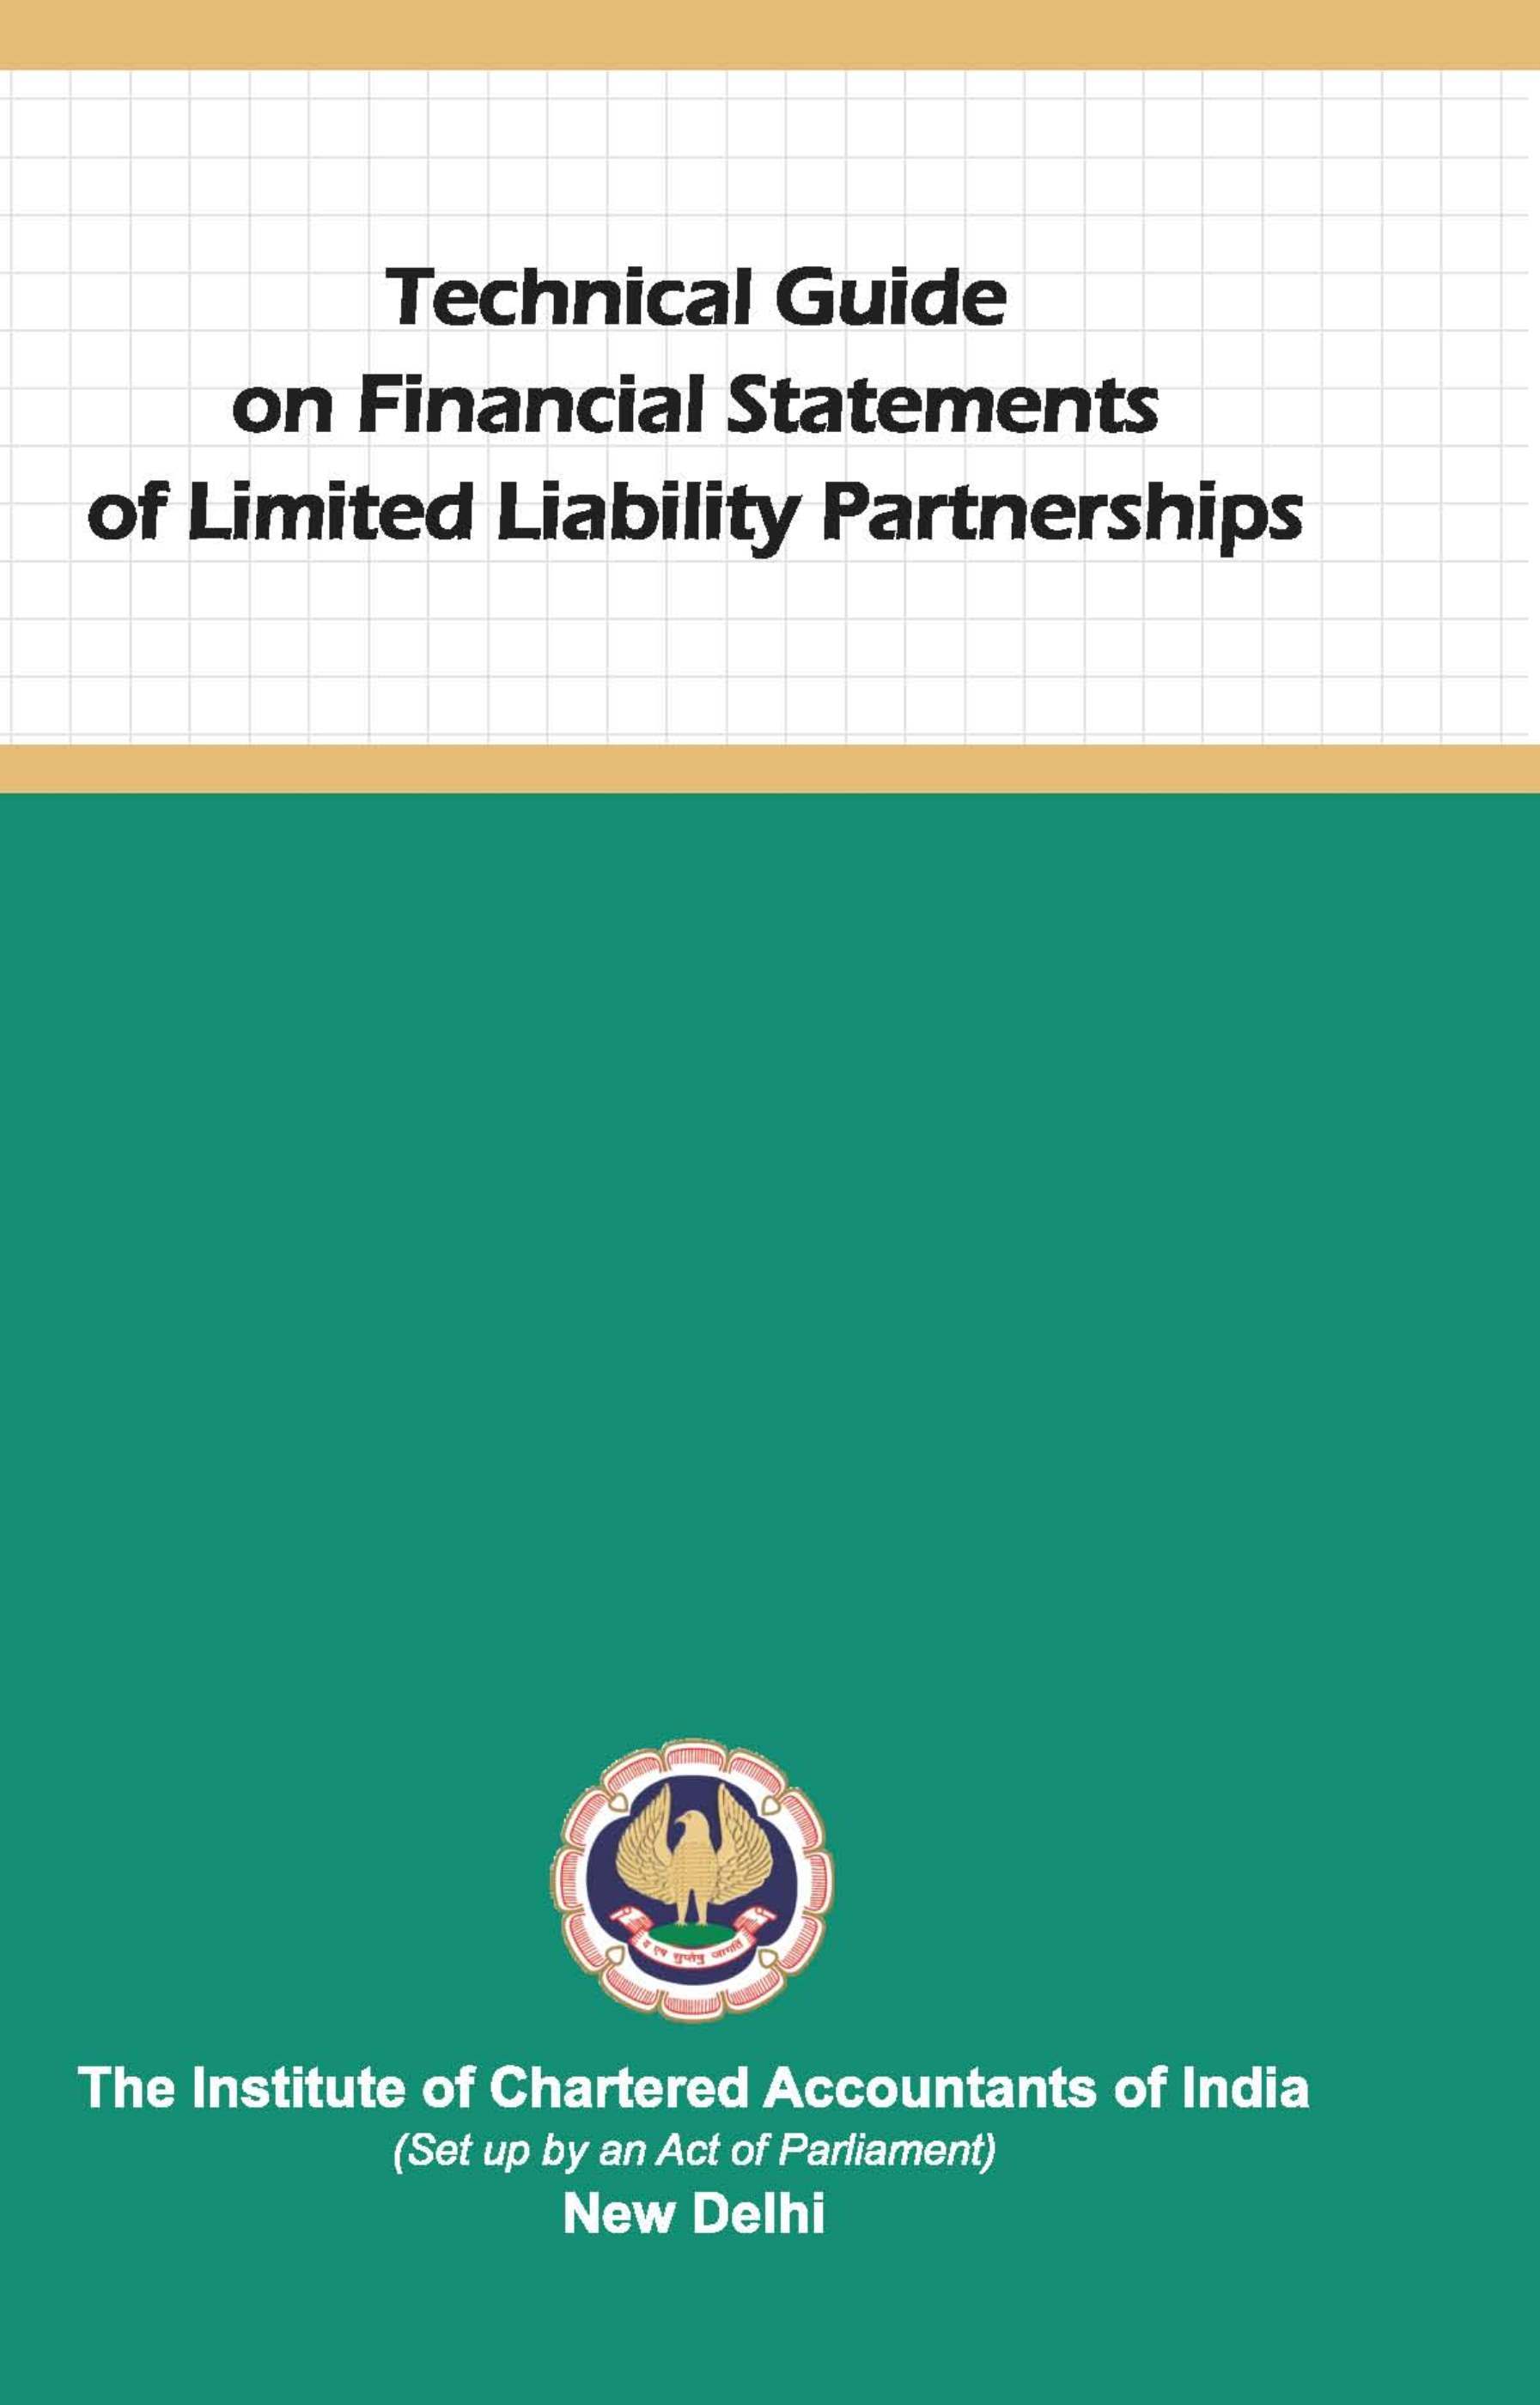 Technical Guide on Financial Statements of Limited Liability Partnerships (June 2022)